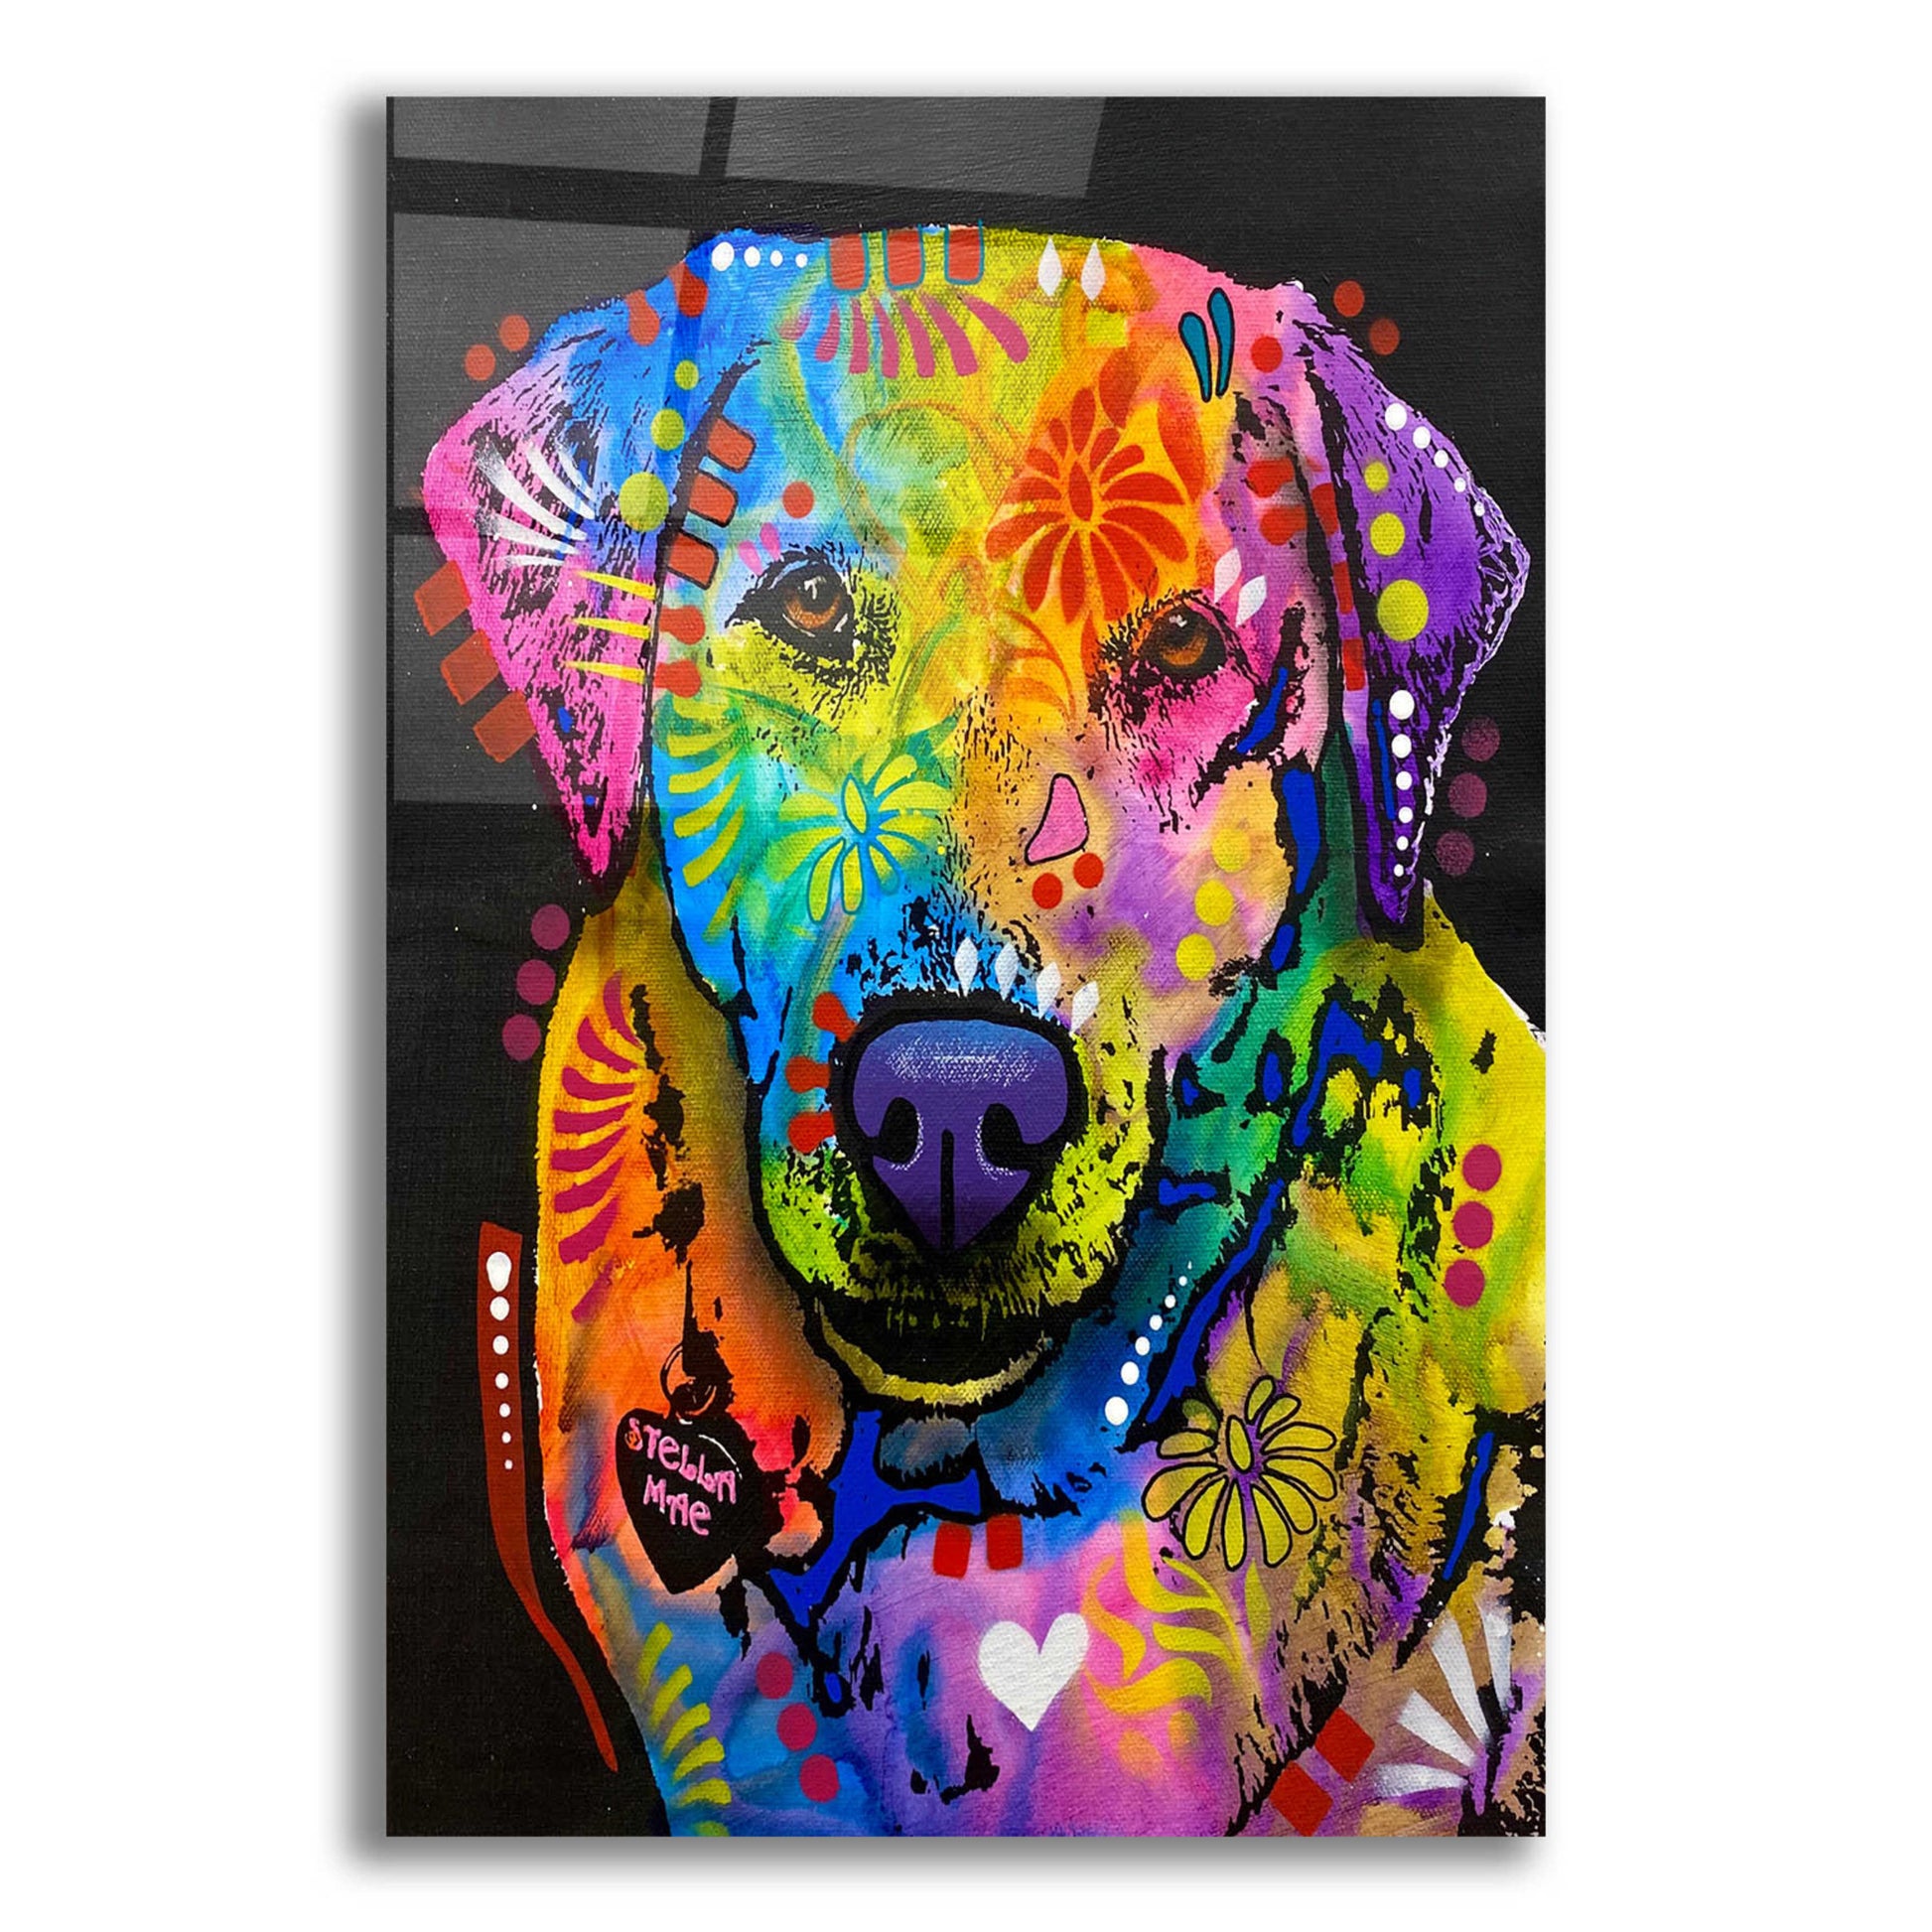 Epic Art 'Don't Do A Thing But Run Around' by Dean Russo, Acrylic Glass Wall Art,16x24